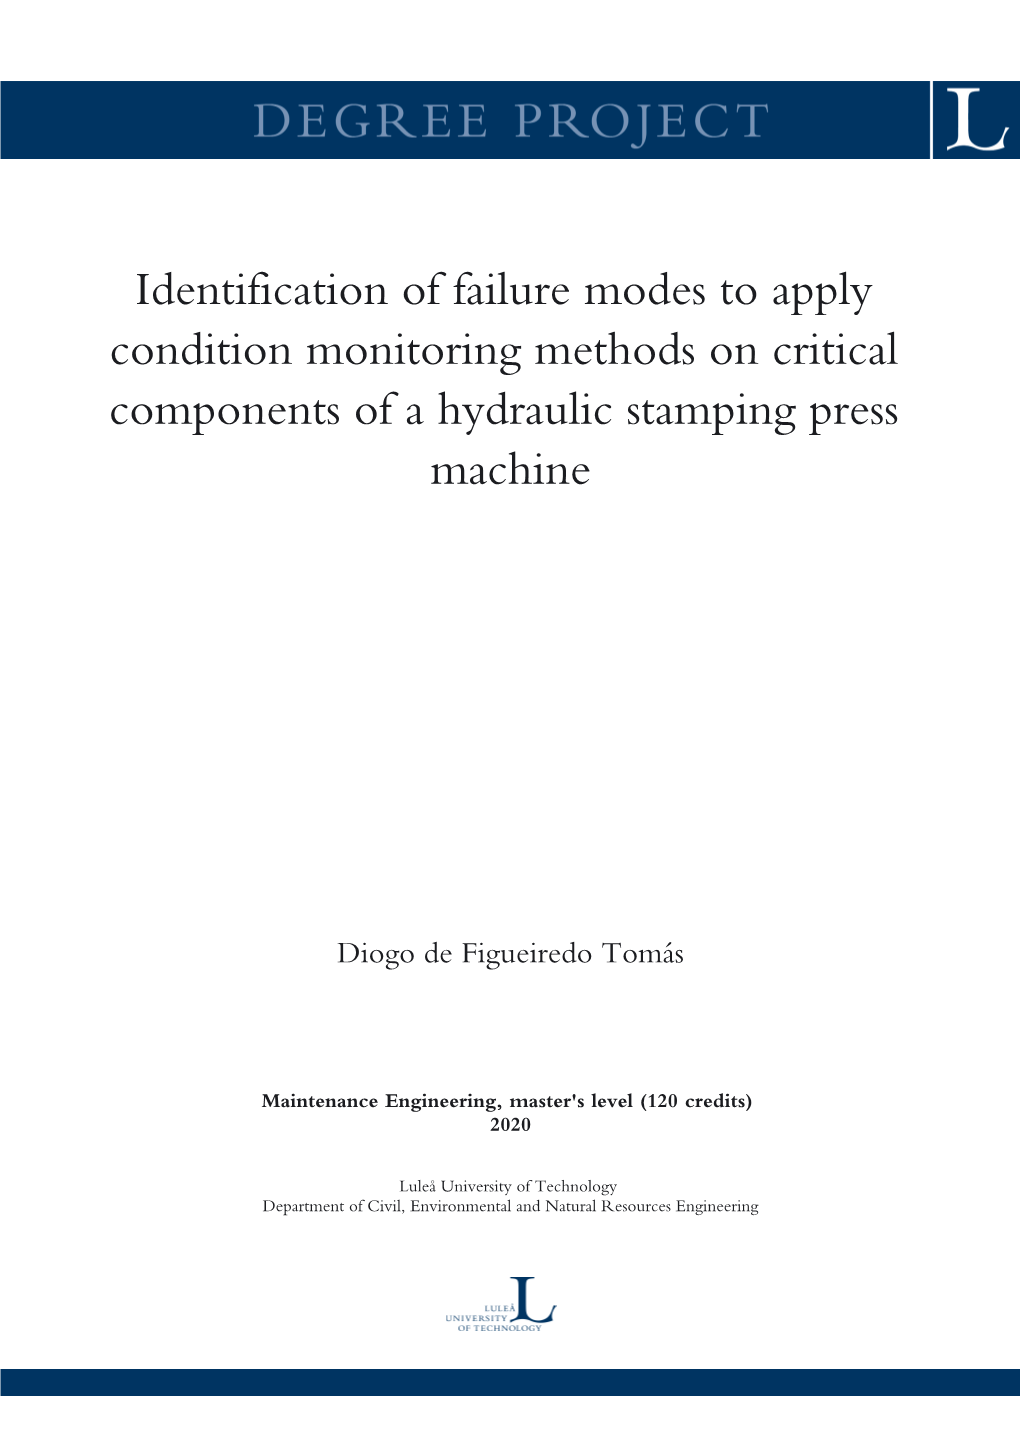 Identification of Failure Modes to Apply Condition Monitoring Methods on Critical Components of a Hydraulic Stamping Press Machine